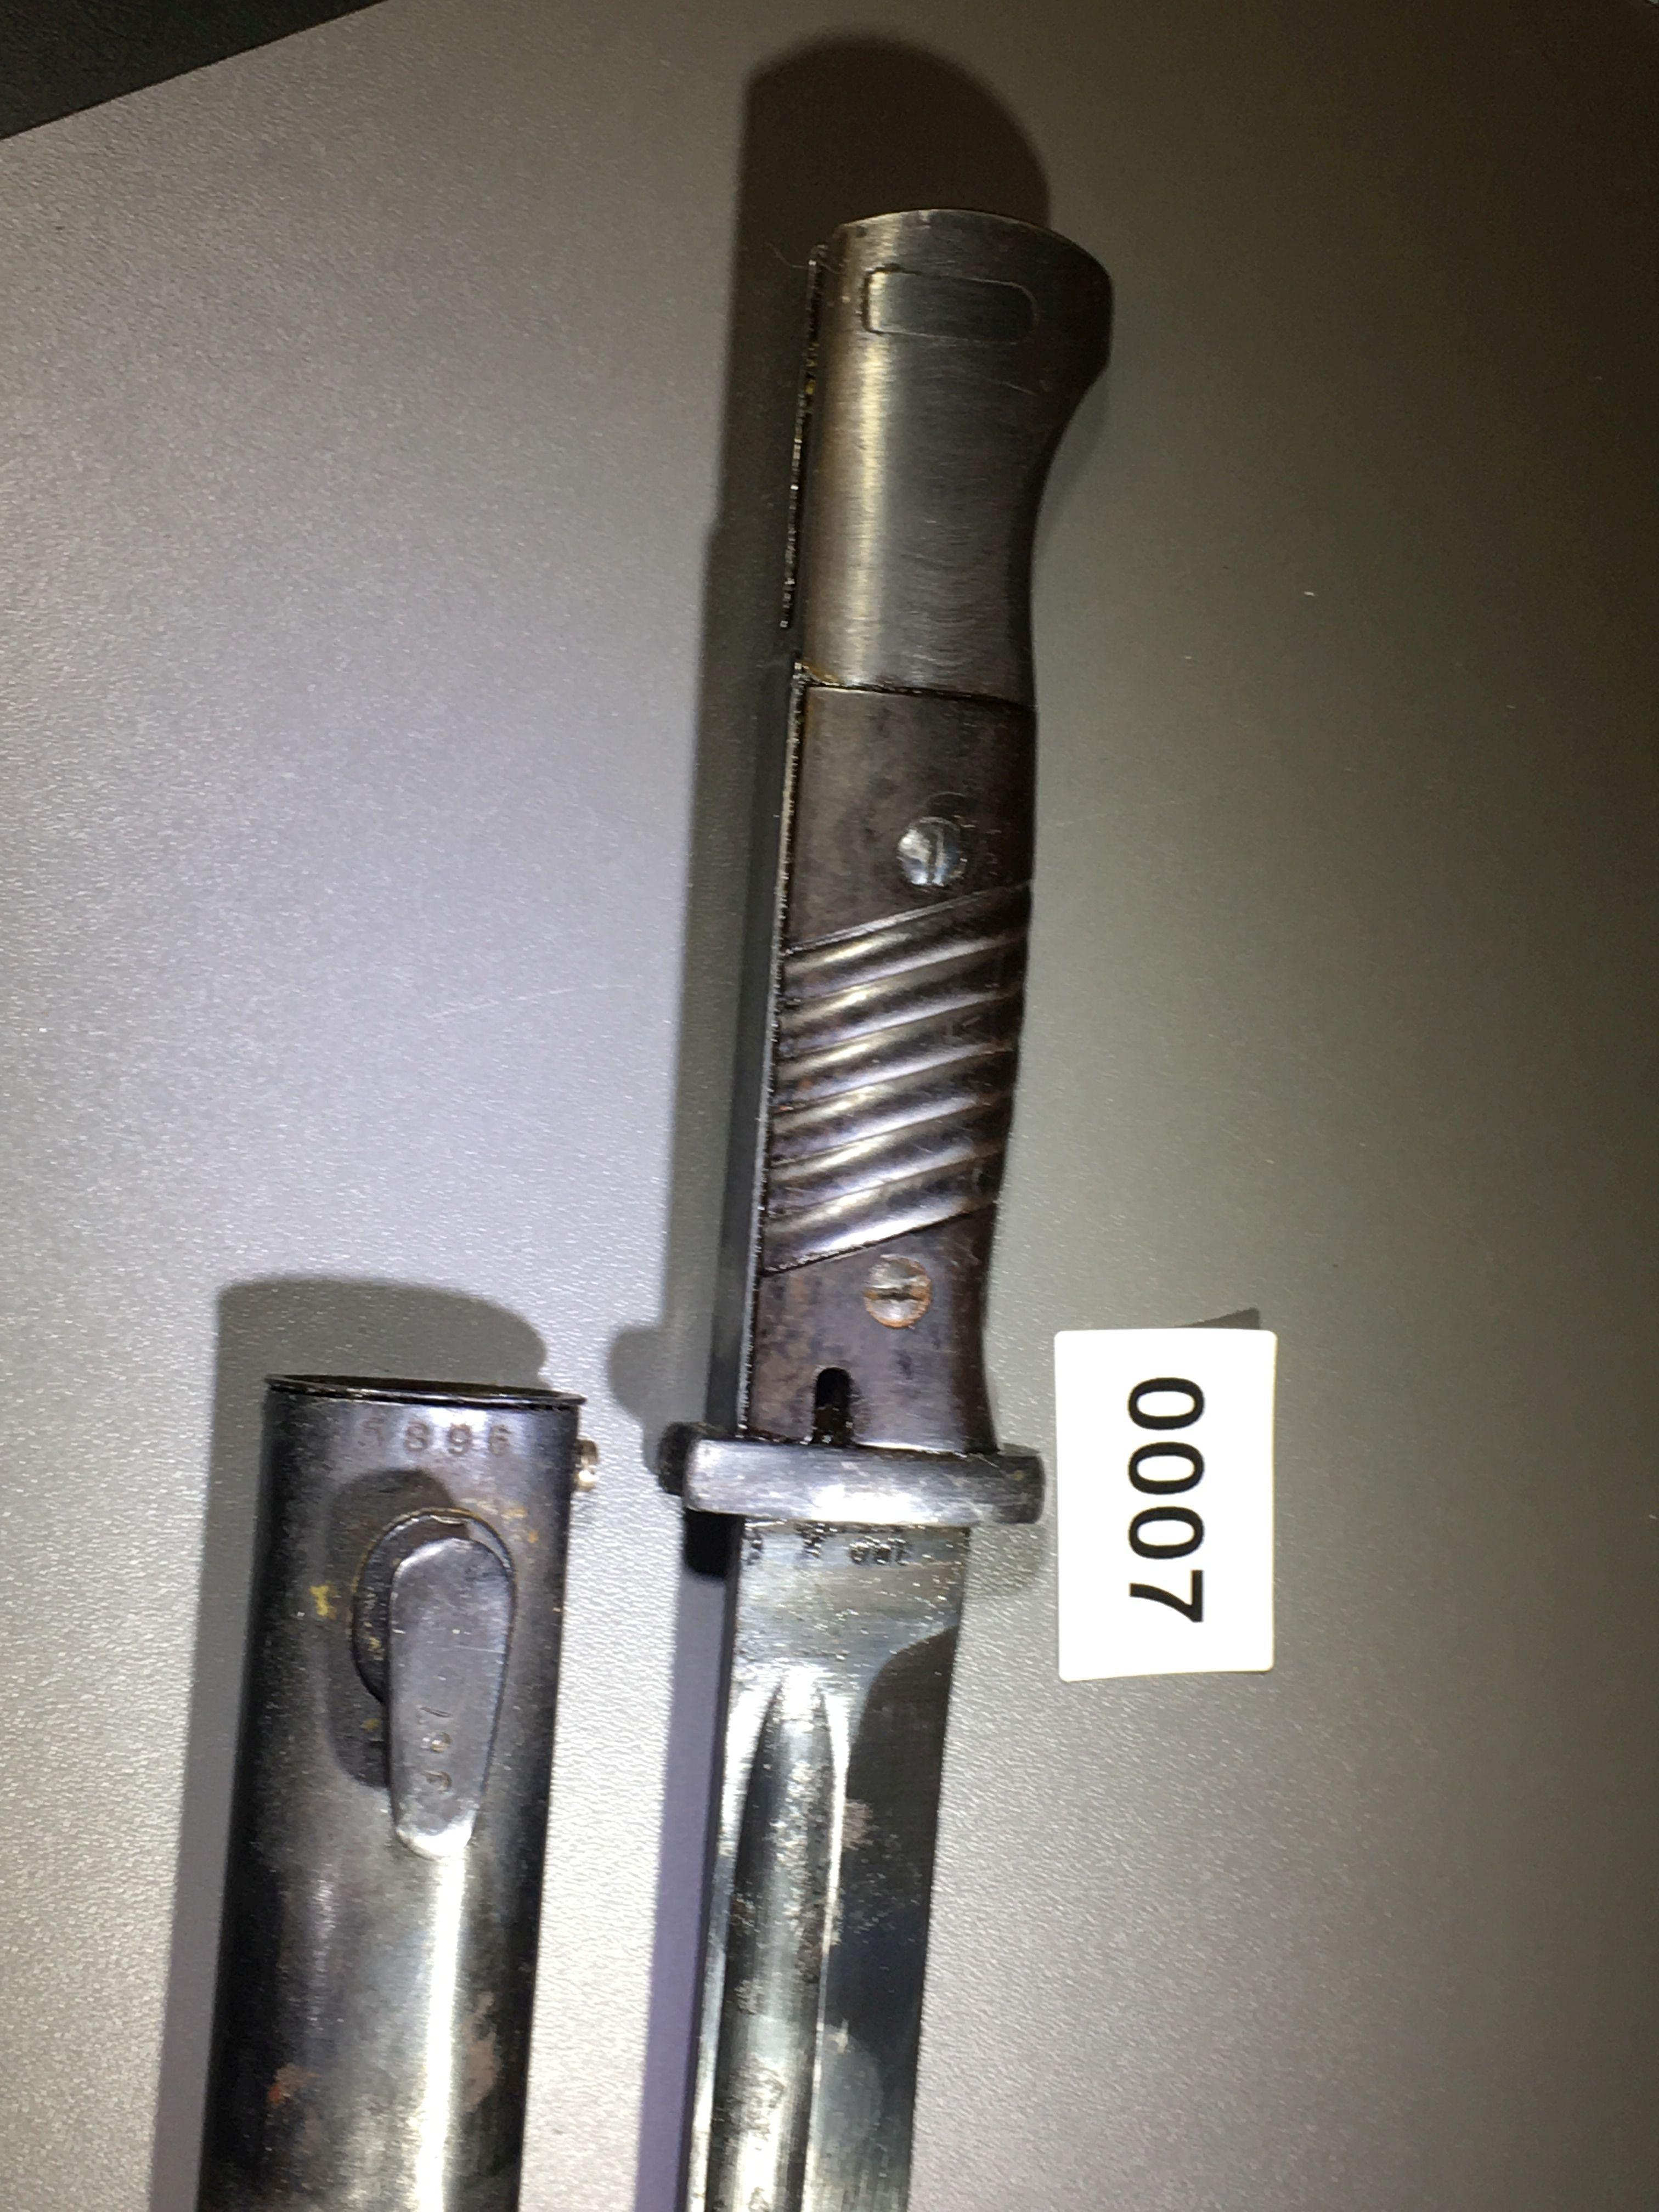 Numbered K98 rifle bayonet. All items in lot photos are included.